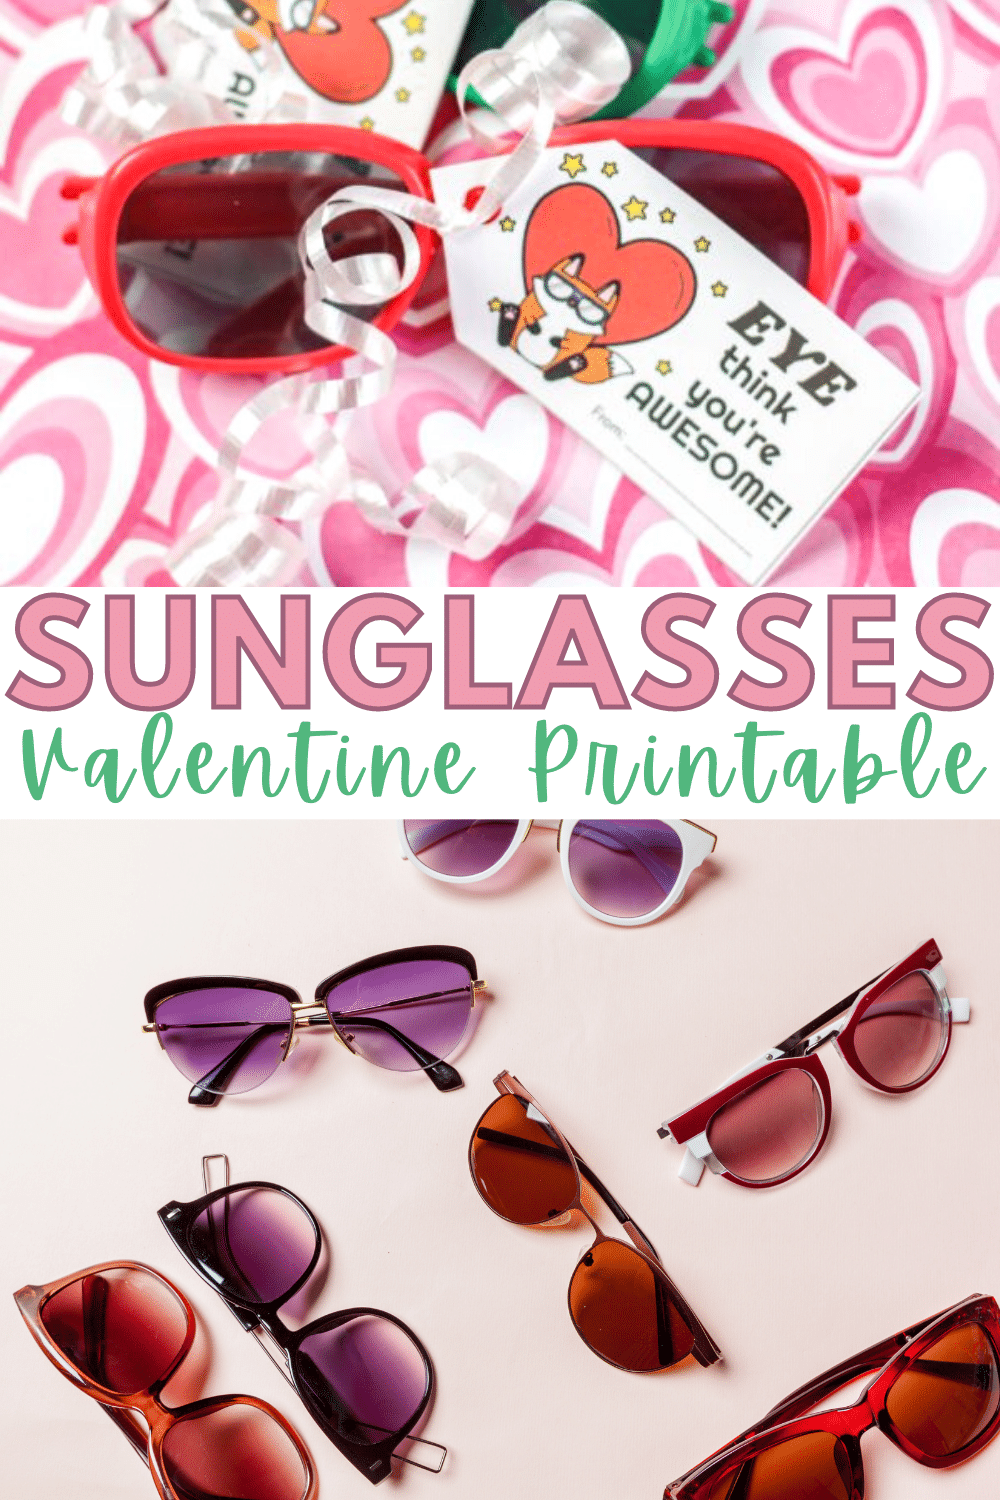 These Sunglasses Valentines are a fun and easy non-candy Valentine idea! Punny cute, and inexpensive. Party favor sunglasses turn into a memorable Valentine gift with the free printable "Eye Think You're Awesome" card attached! #valentine #printable #noncandy via @wondermomwannab